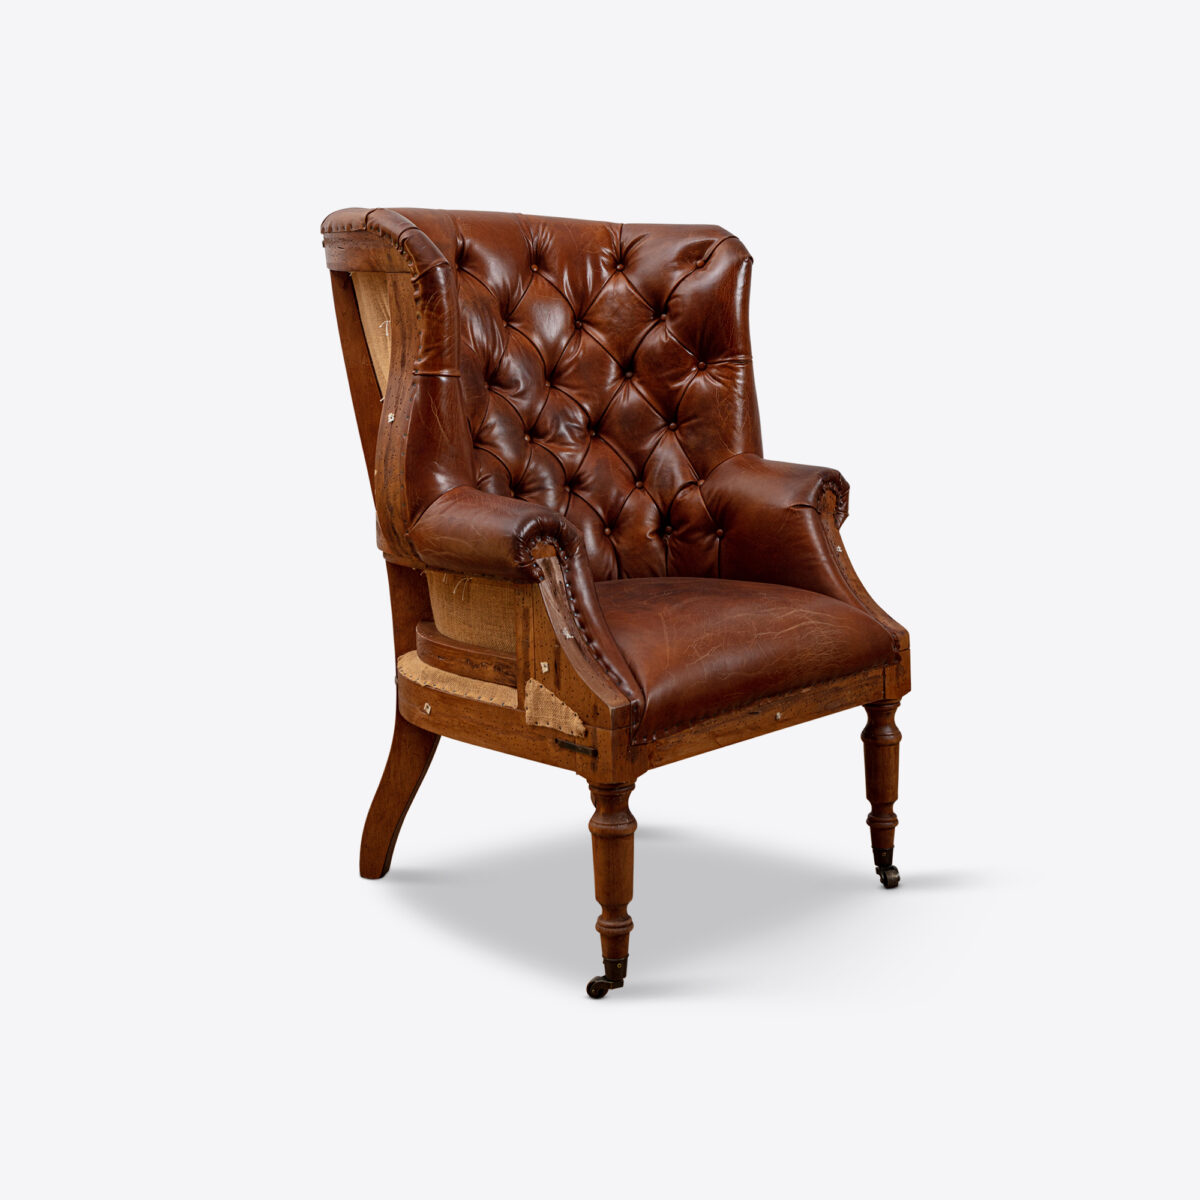 Deconstructed Leather Petworth Armchair